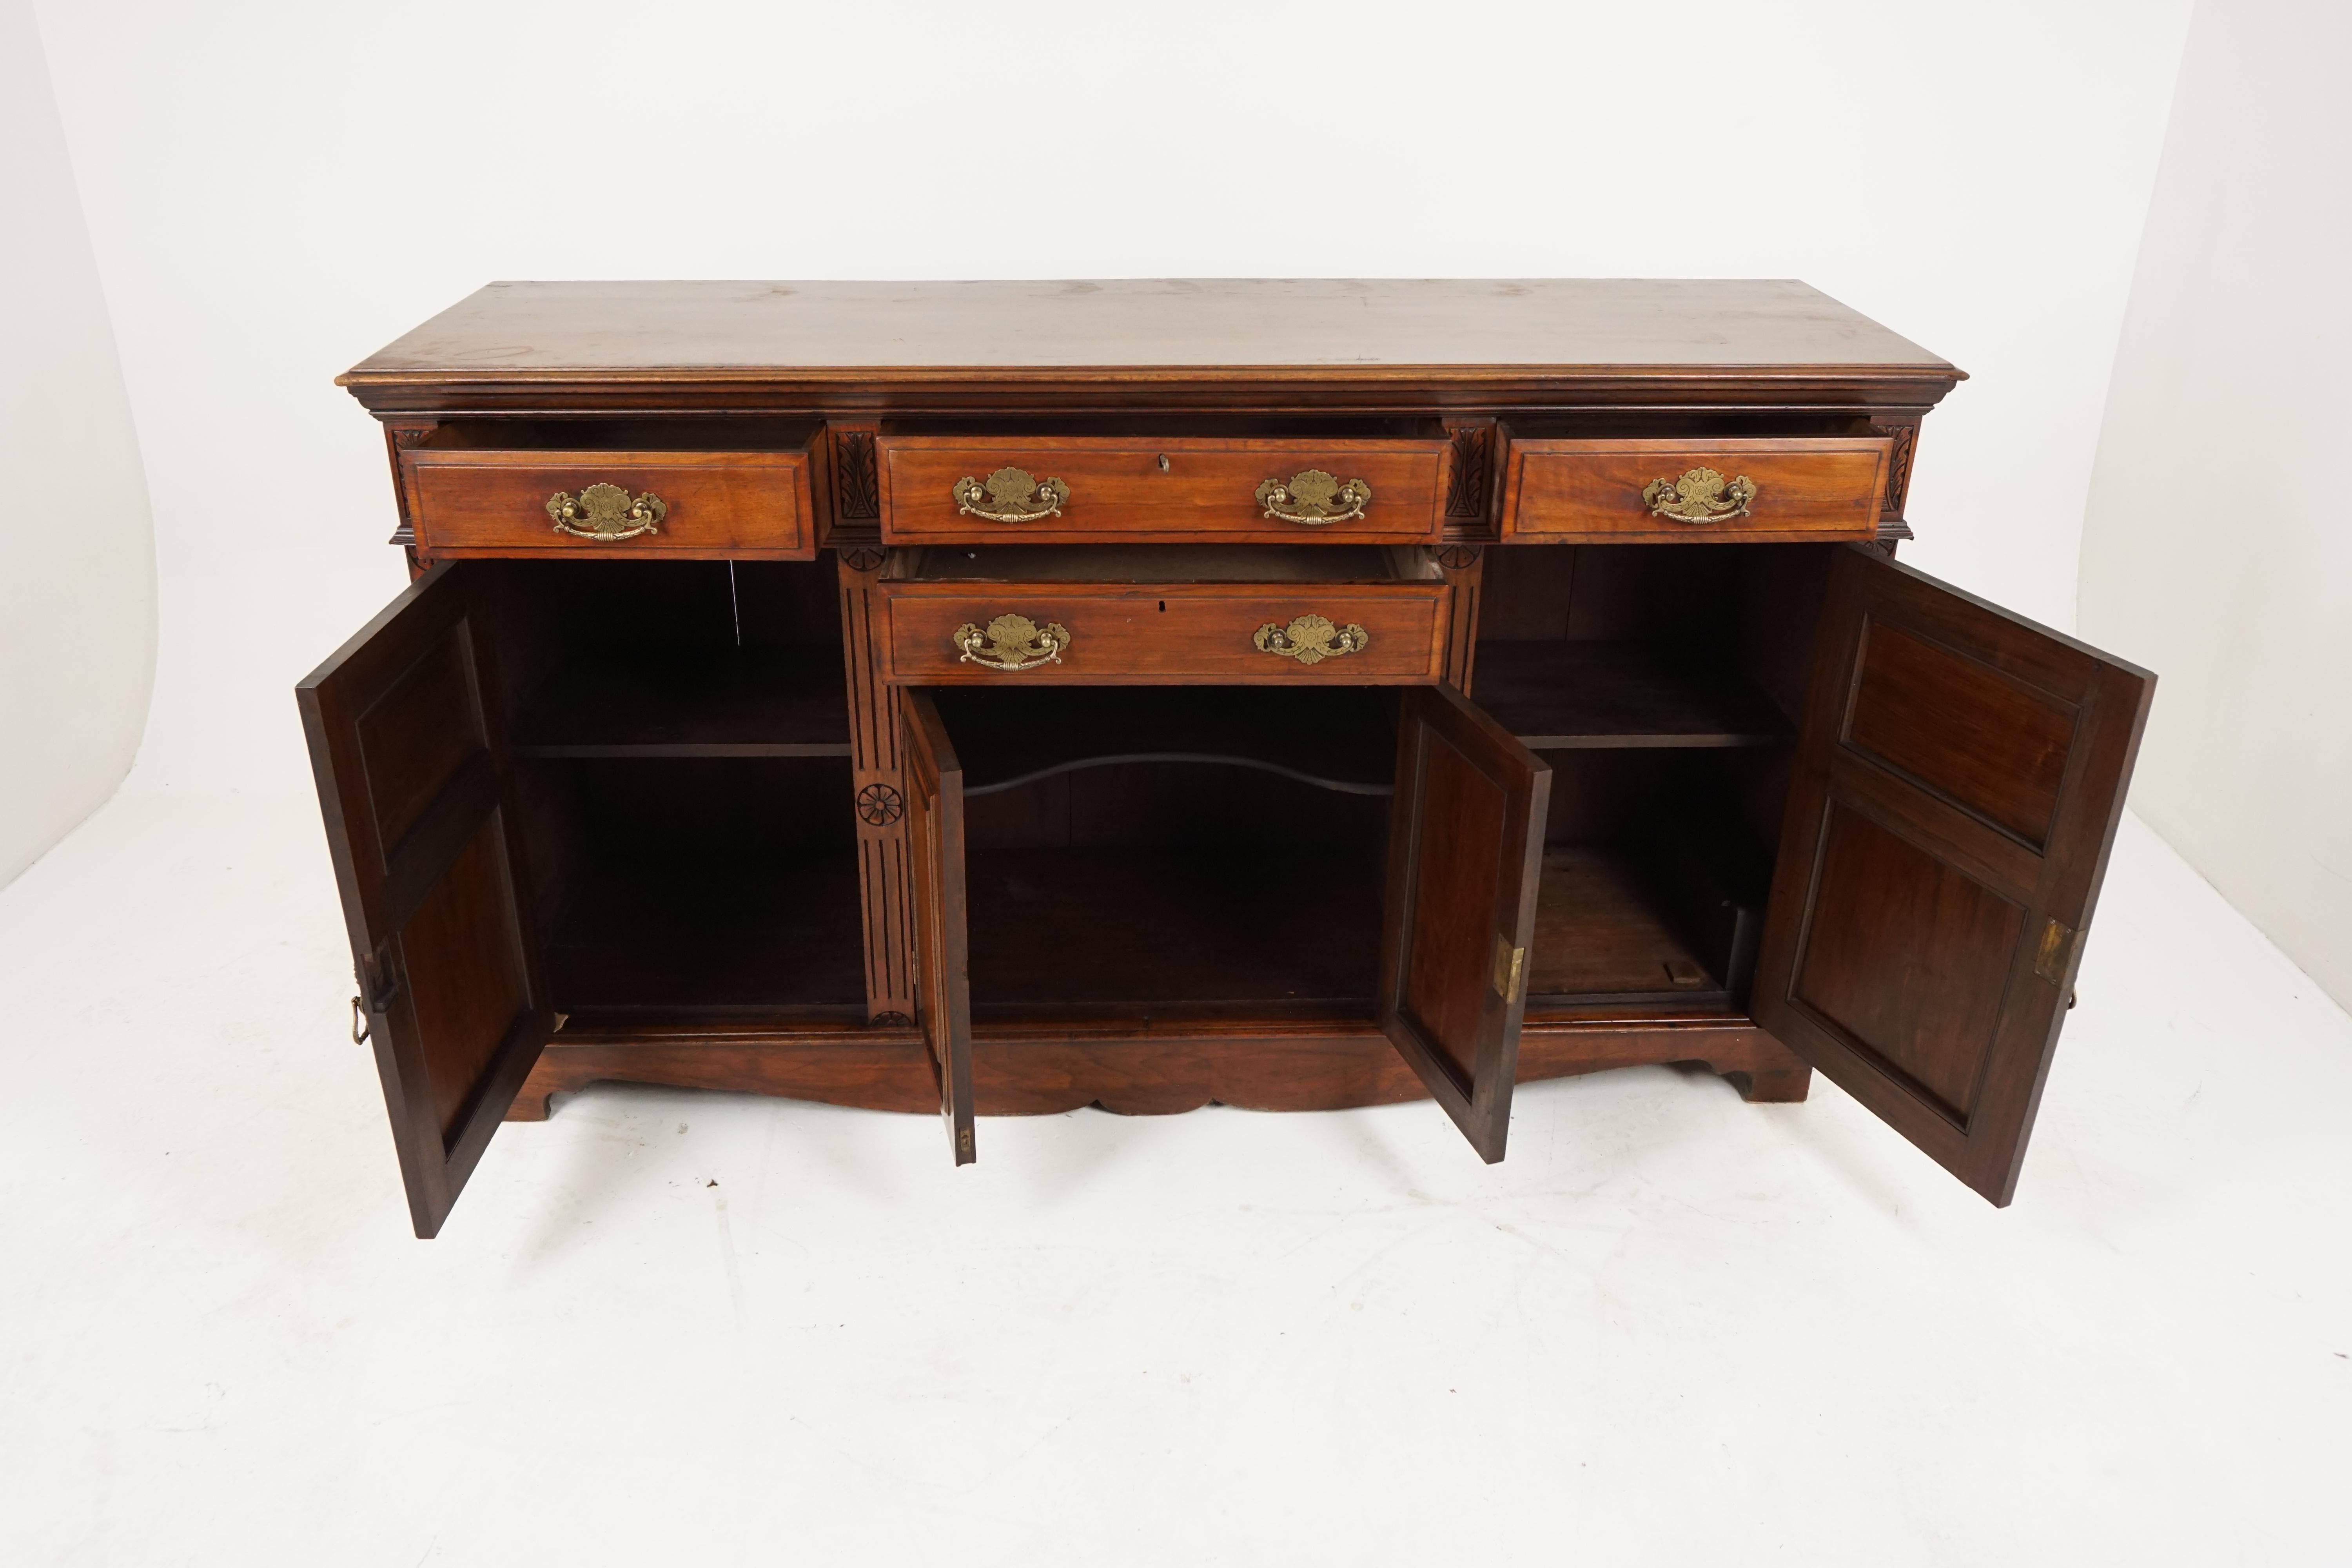 Antique Victorian sideboard, walnut buffet or dresser, Antique Furniture, Scotland 1890, B1808

Scotland 1890
Solid walnut
Original finish
Rectangular top with moulded edge
The center of the sideboard has two long drawers with a pair of